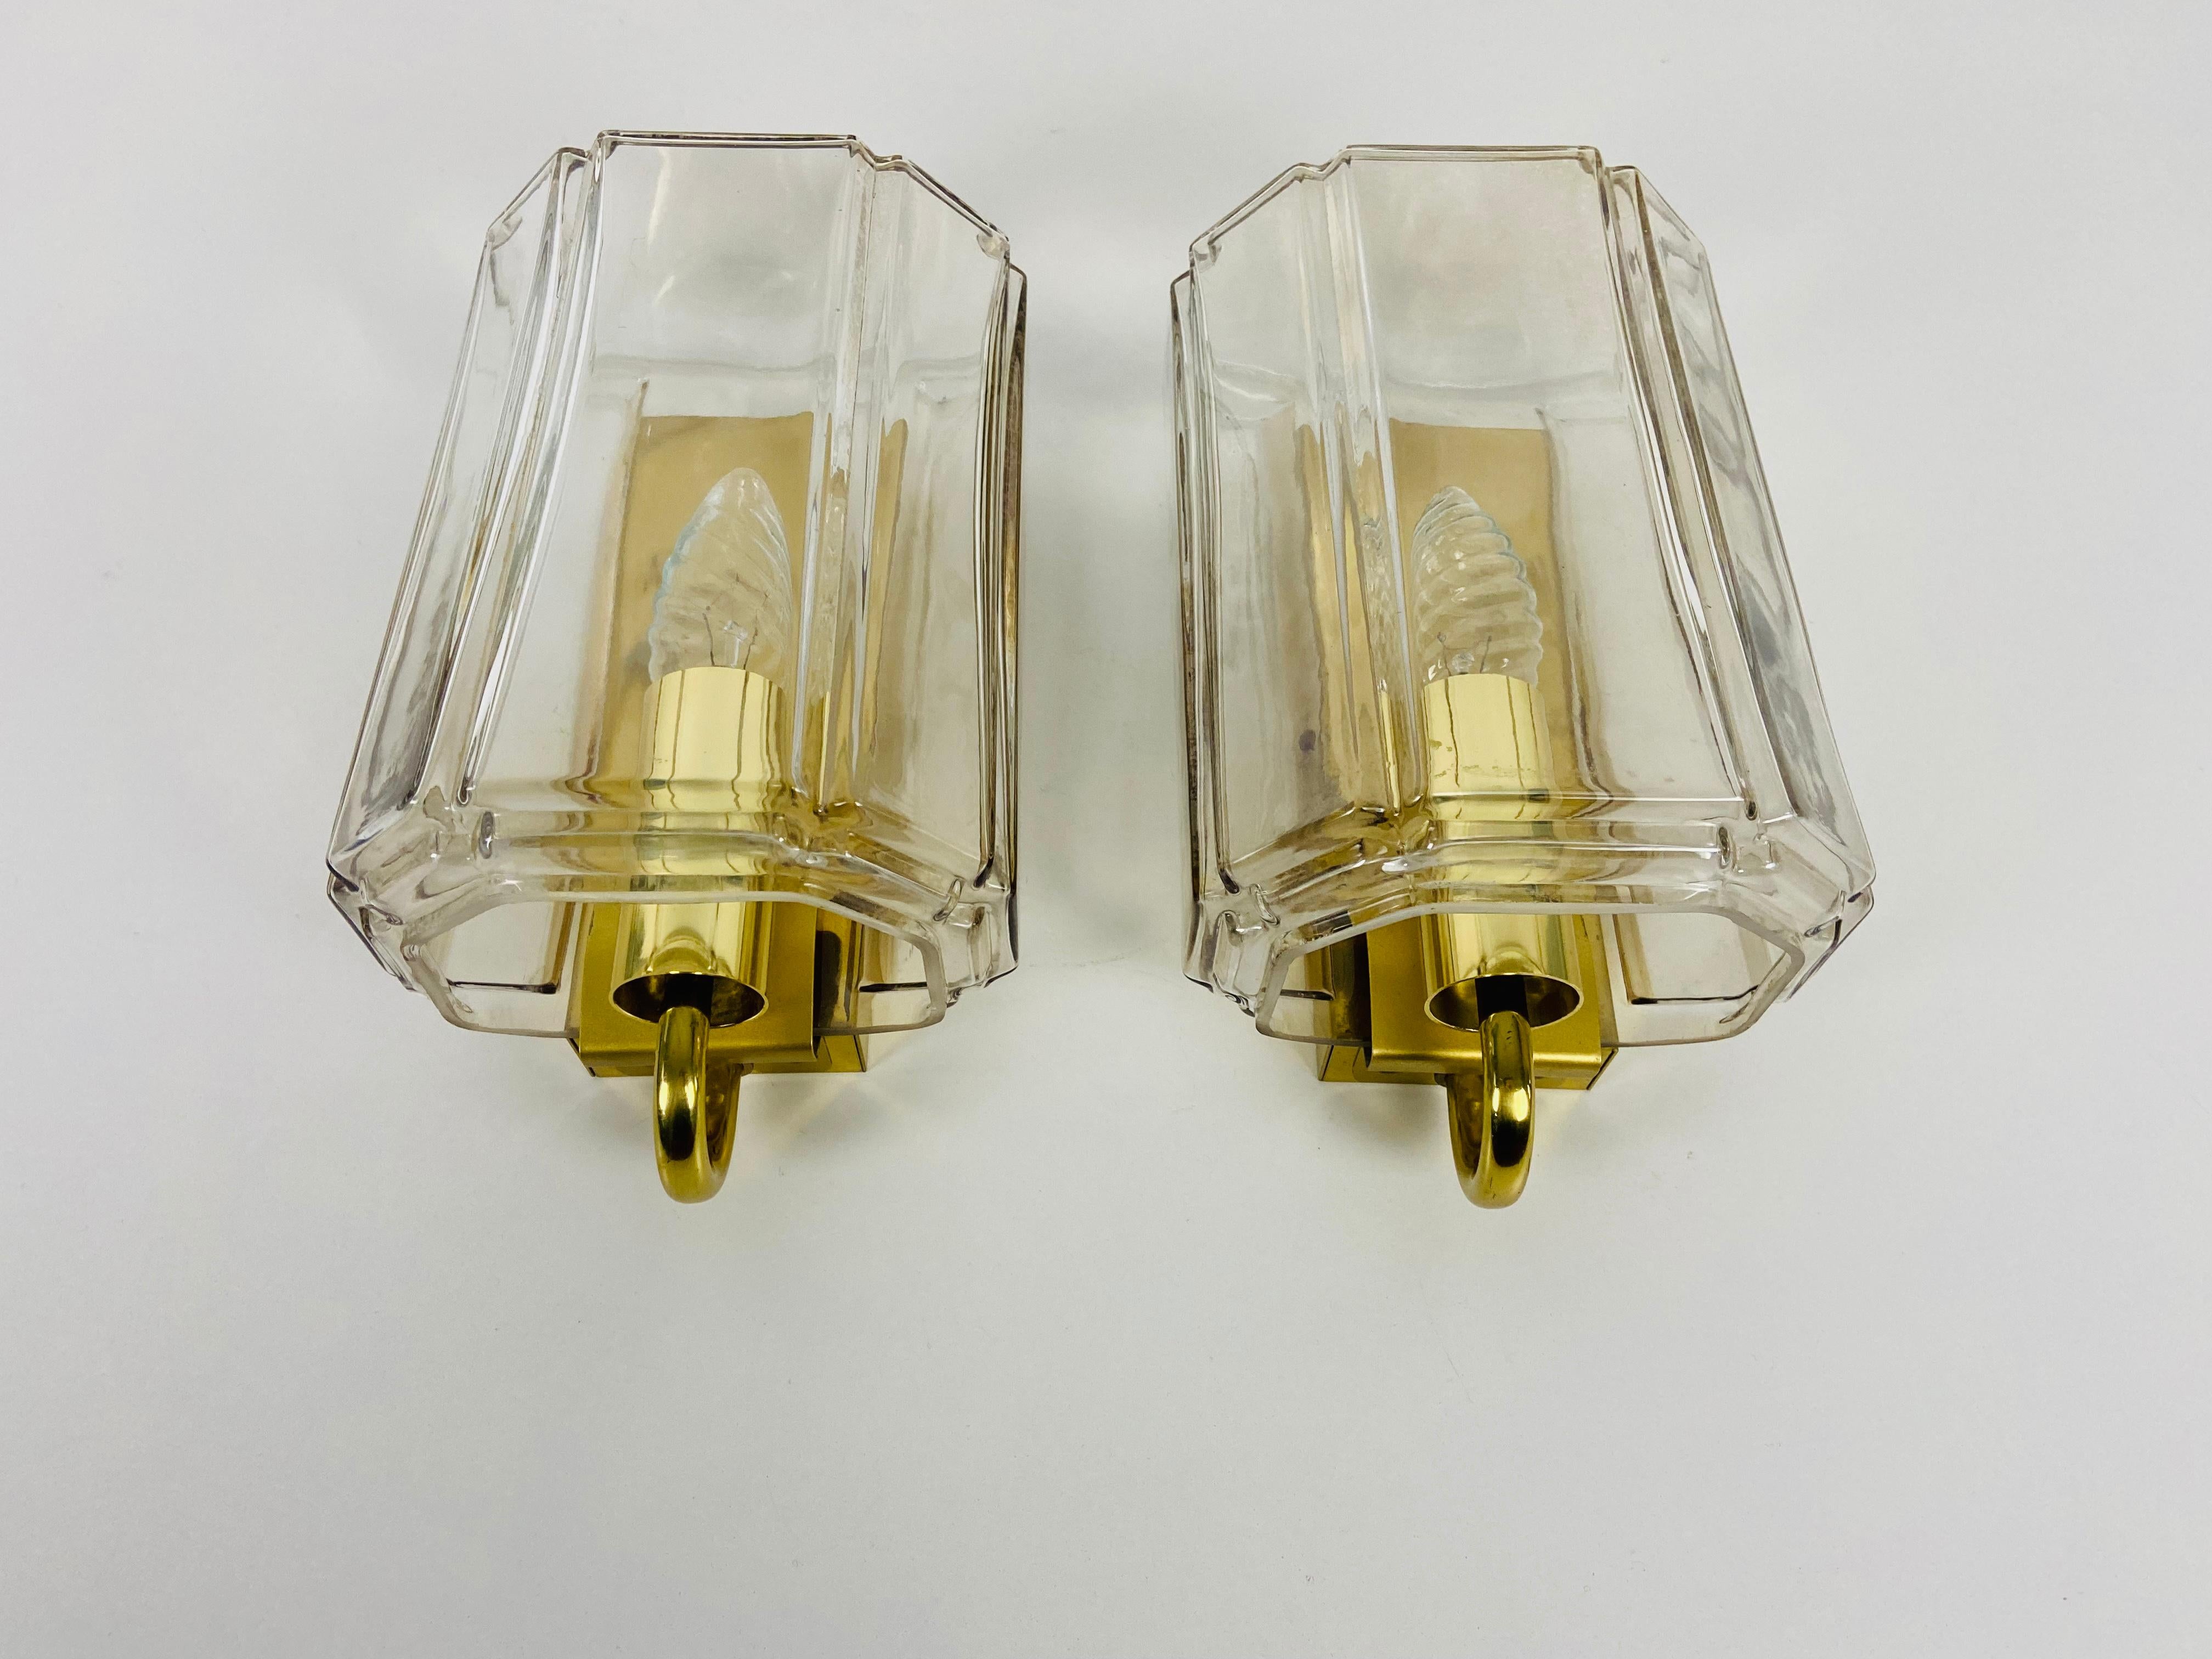 A beautiful pair of glass wall lamps made by Glashütte Limburg in Germany in the 1970s. The light is made of thick glass. It has an amazing transparent color and it is very solid. The body is made of solid brass.

The lights require E14 light